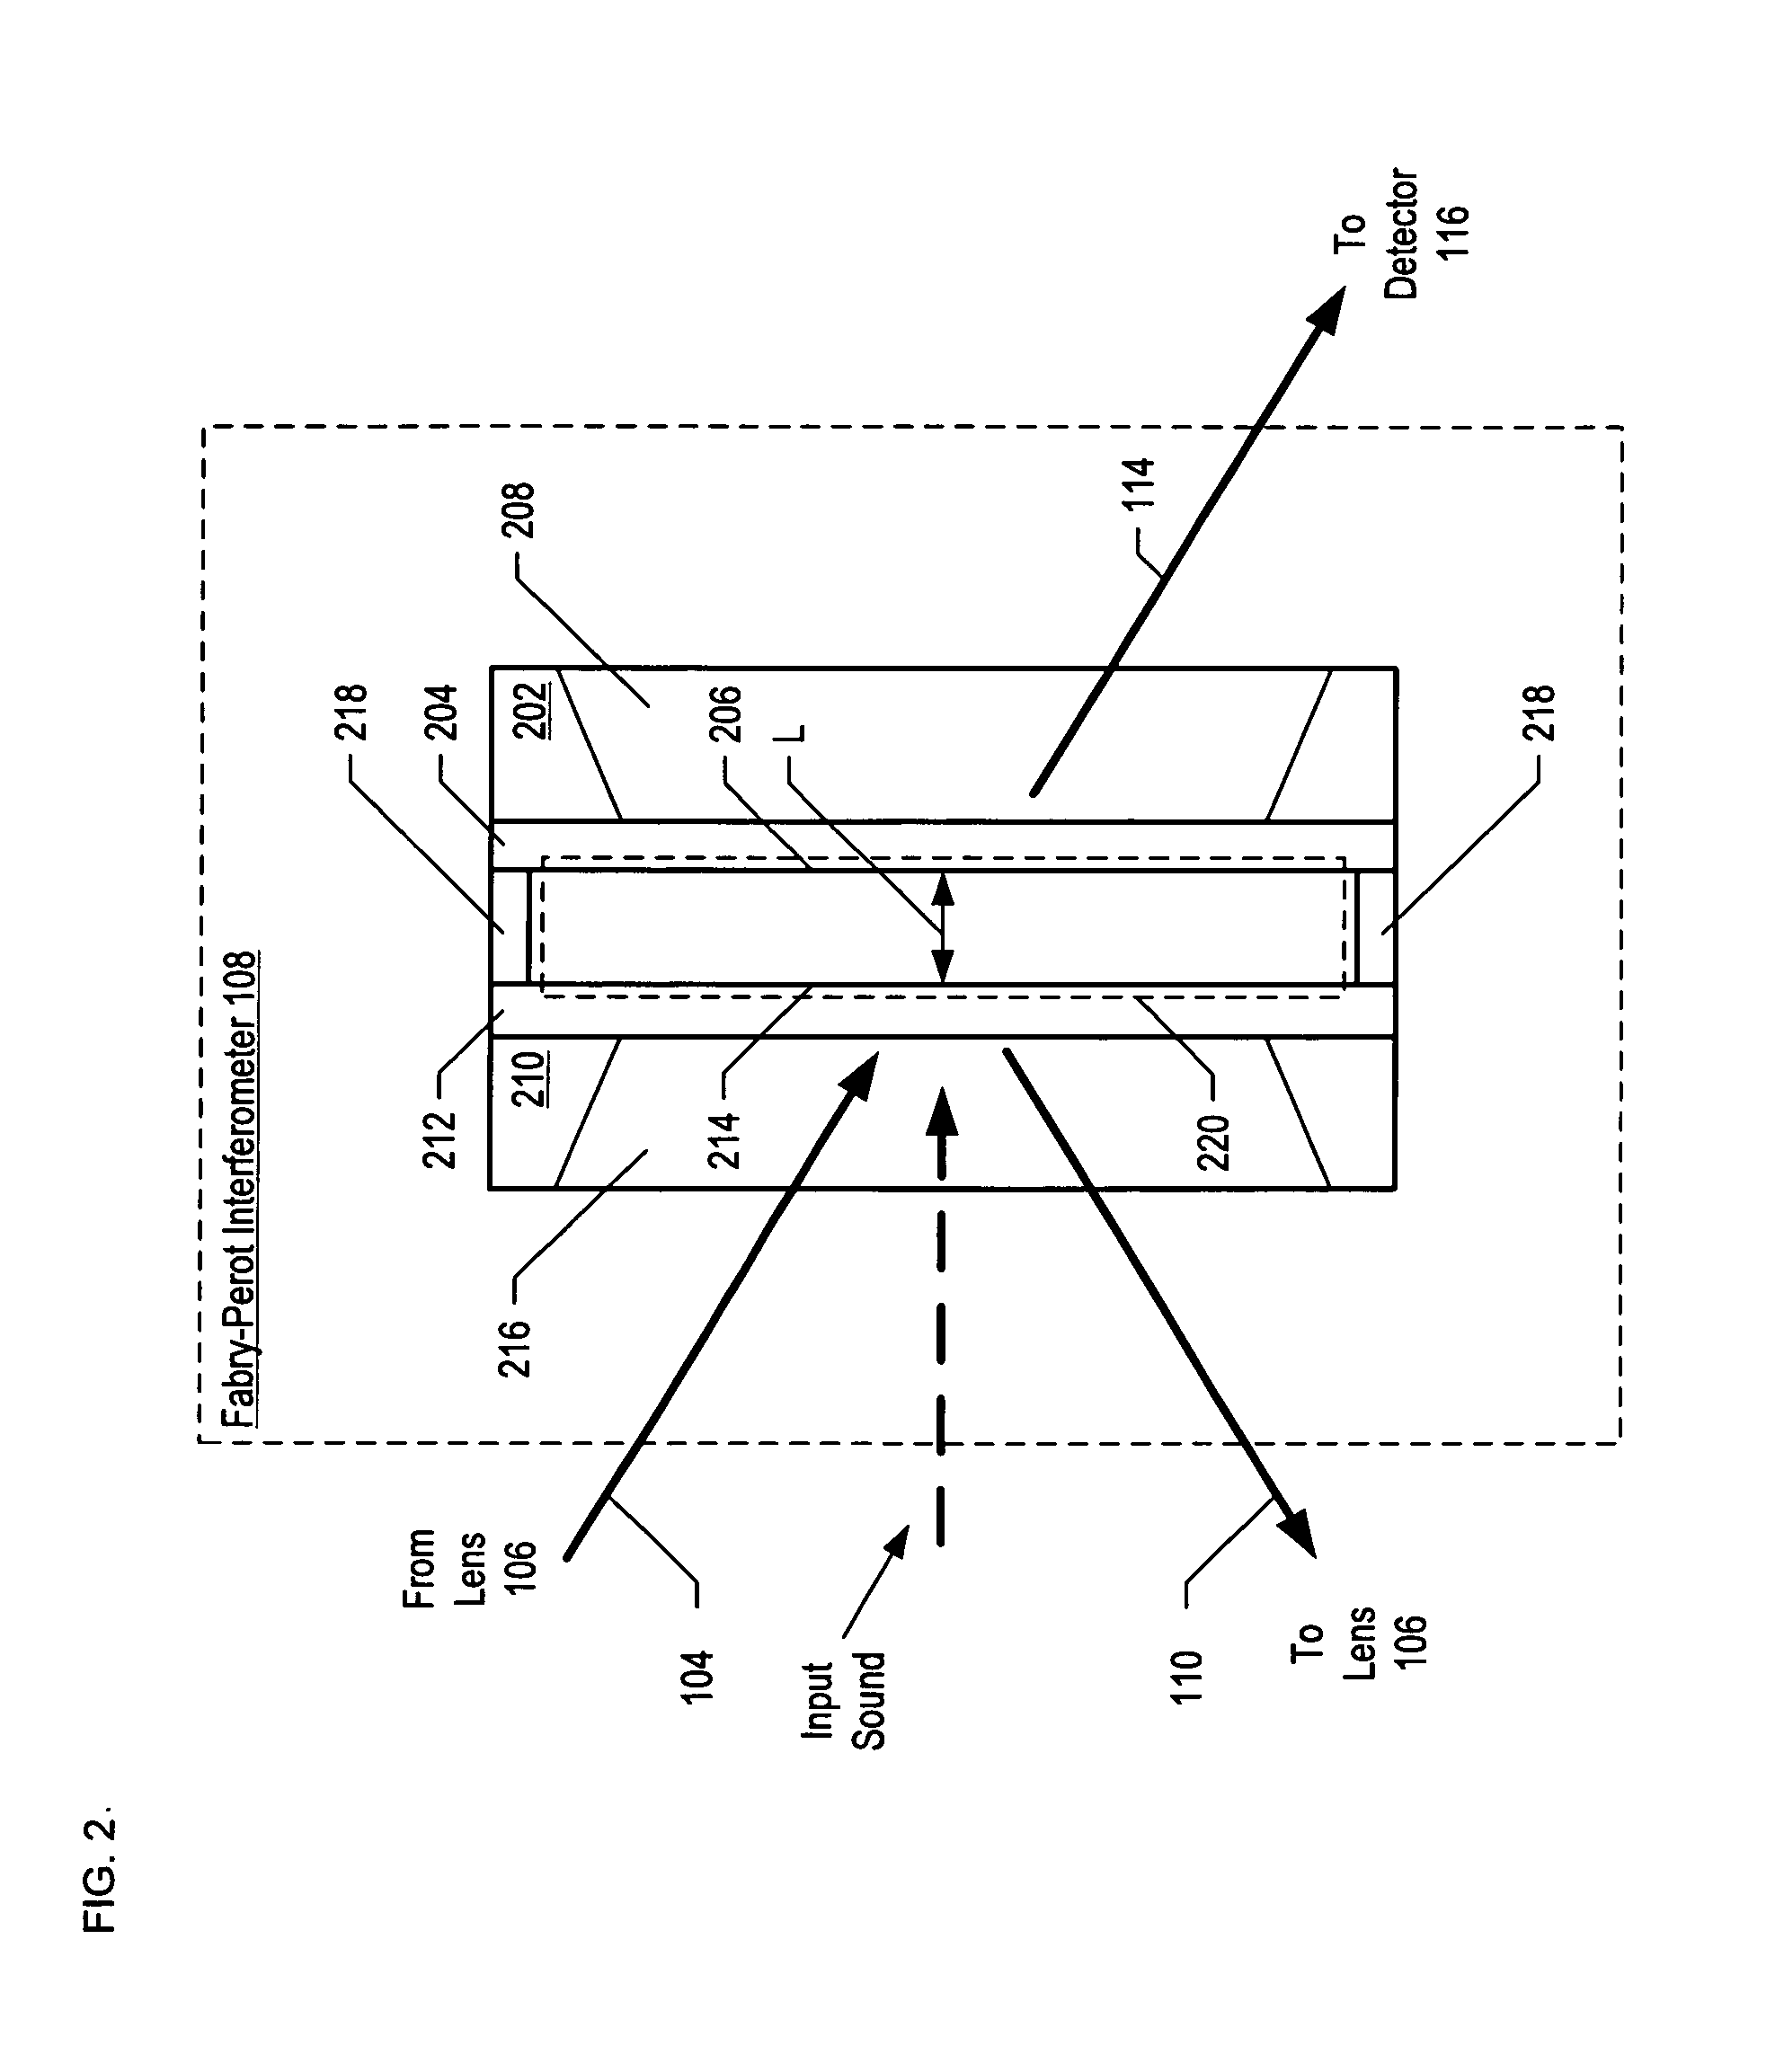 Accelerometer comprising an optically resonant cavity